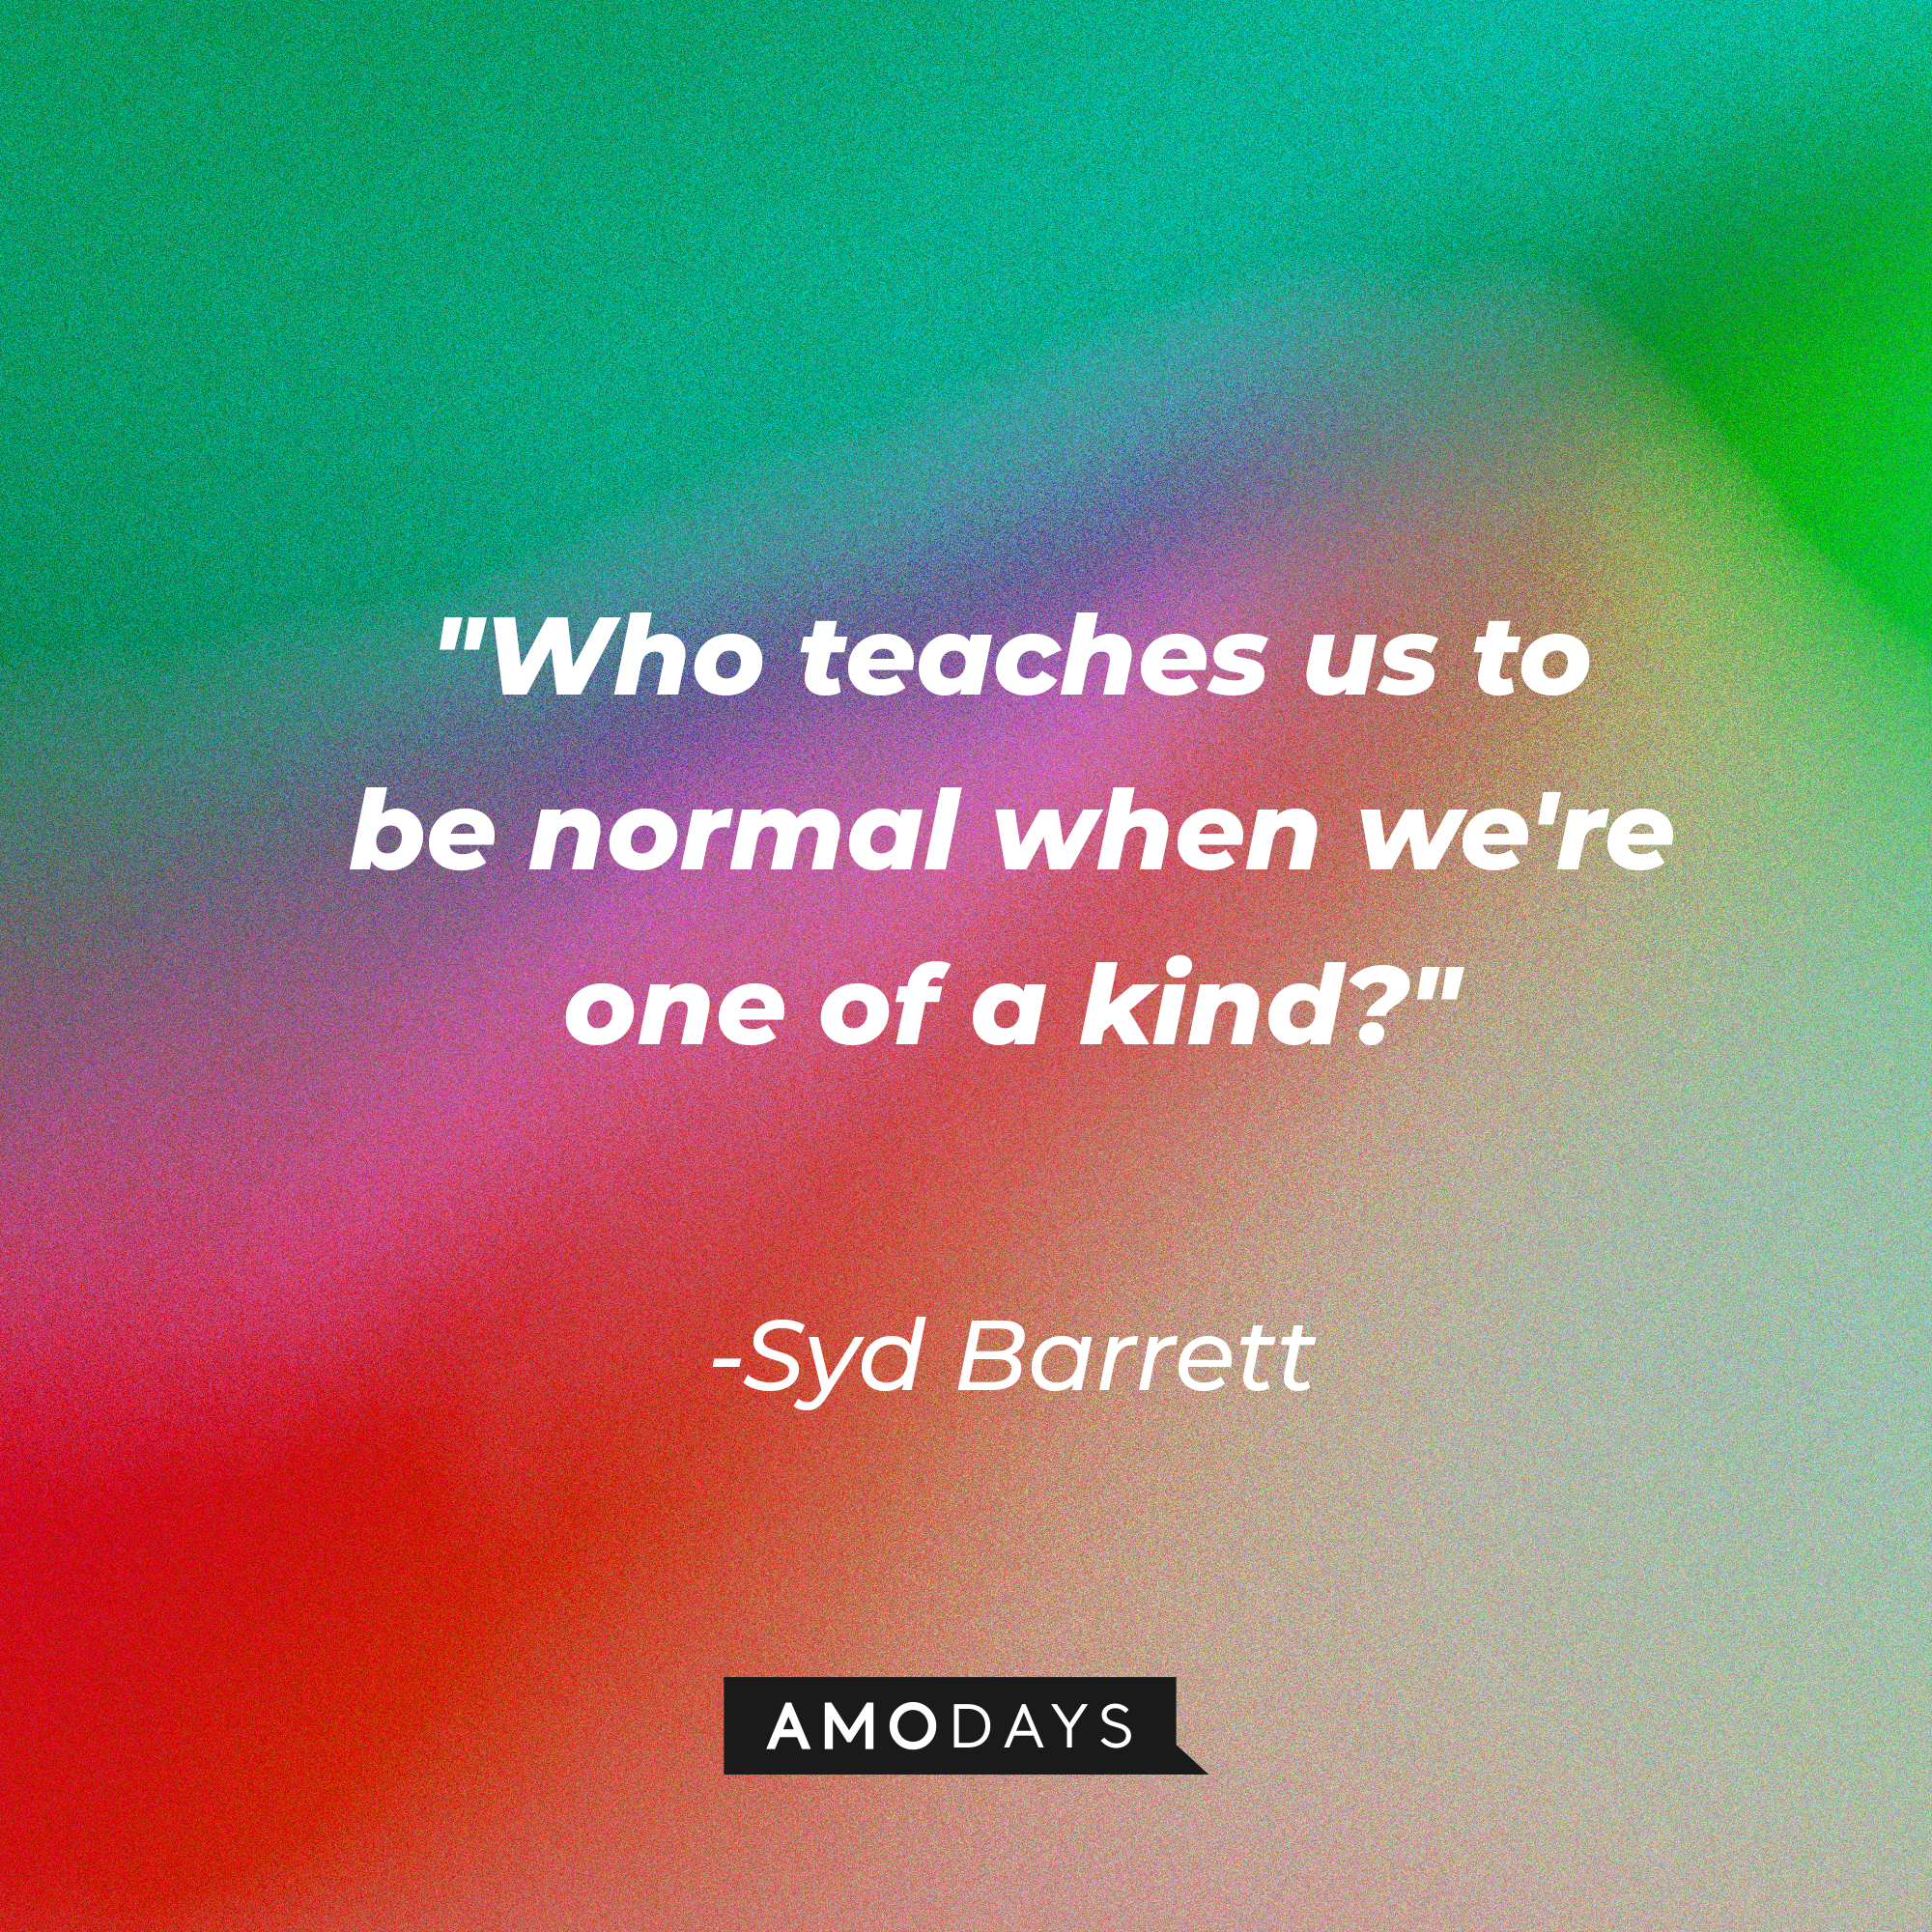 Syd Barrett's quote: "Who teaches us to be normal when we're one of a kind?" | Image: AmoDays